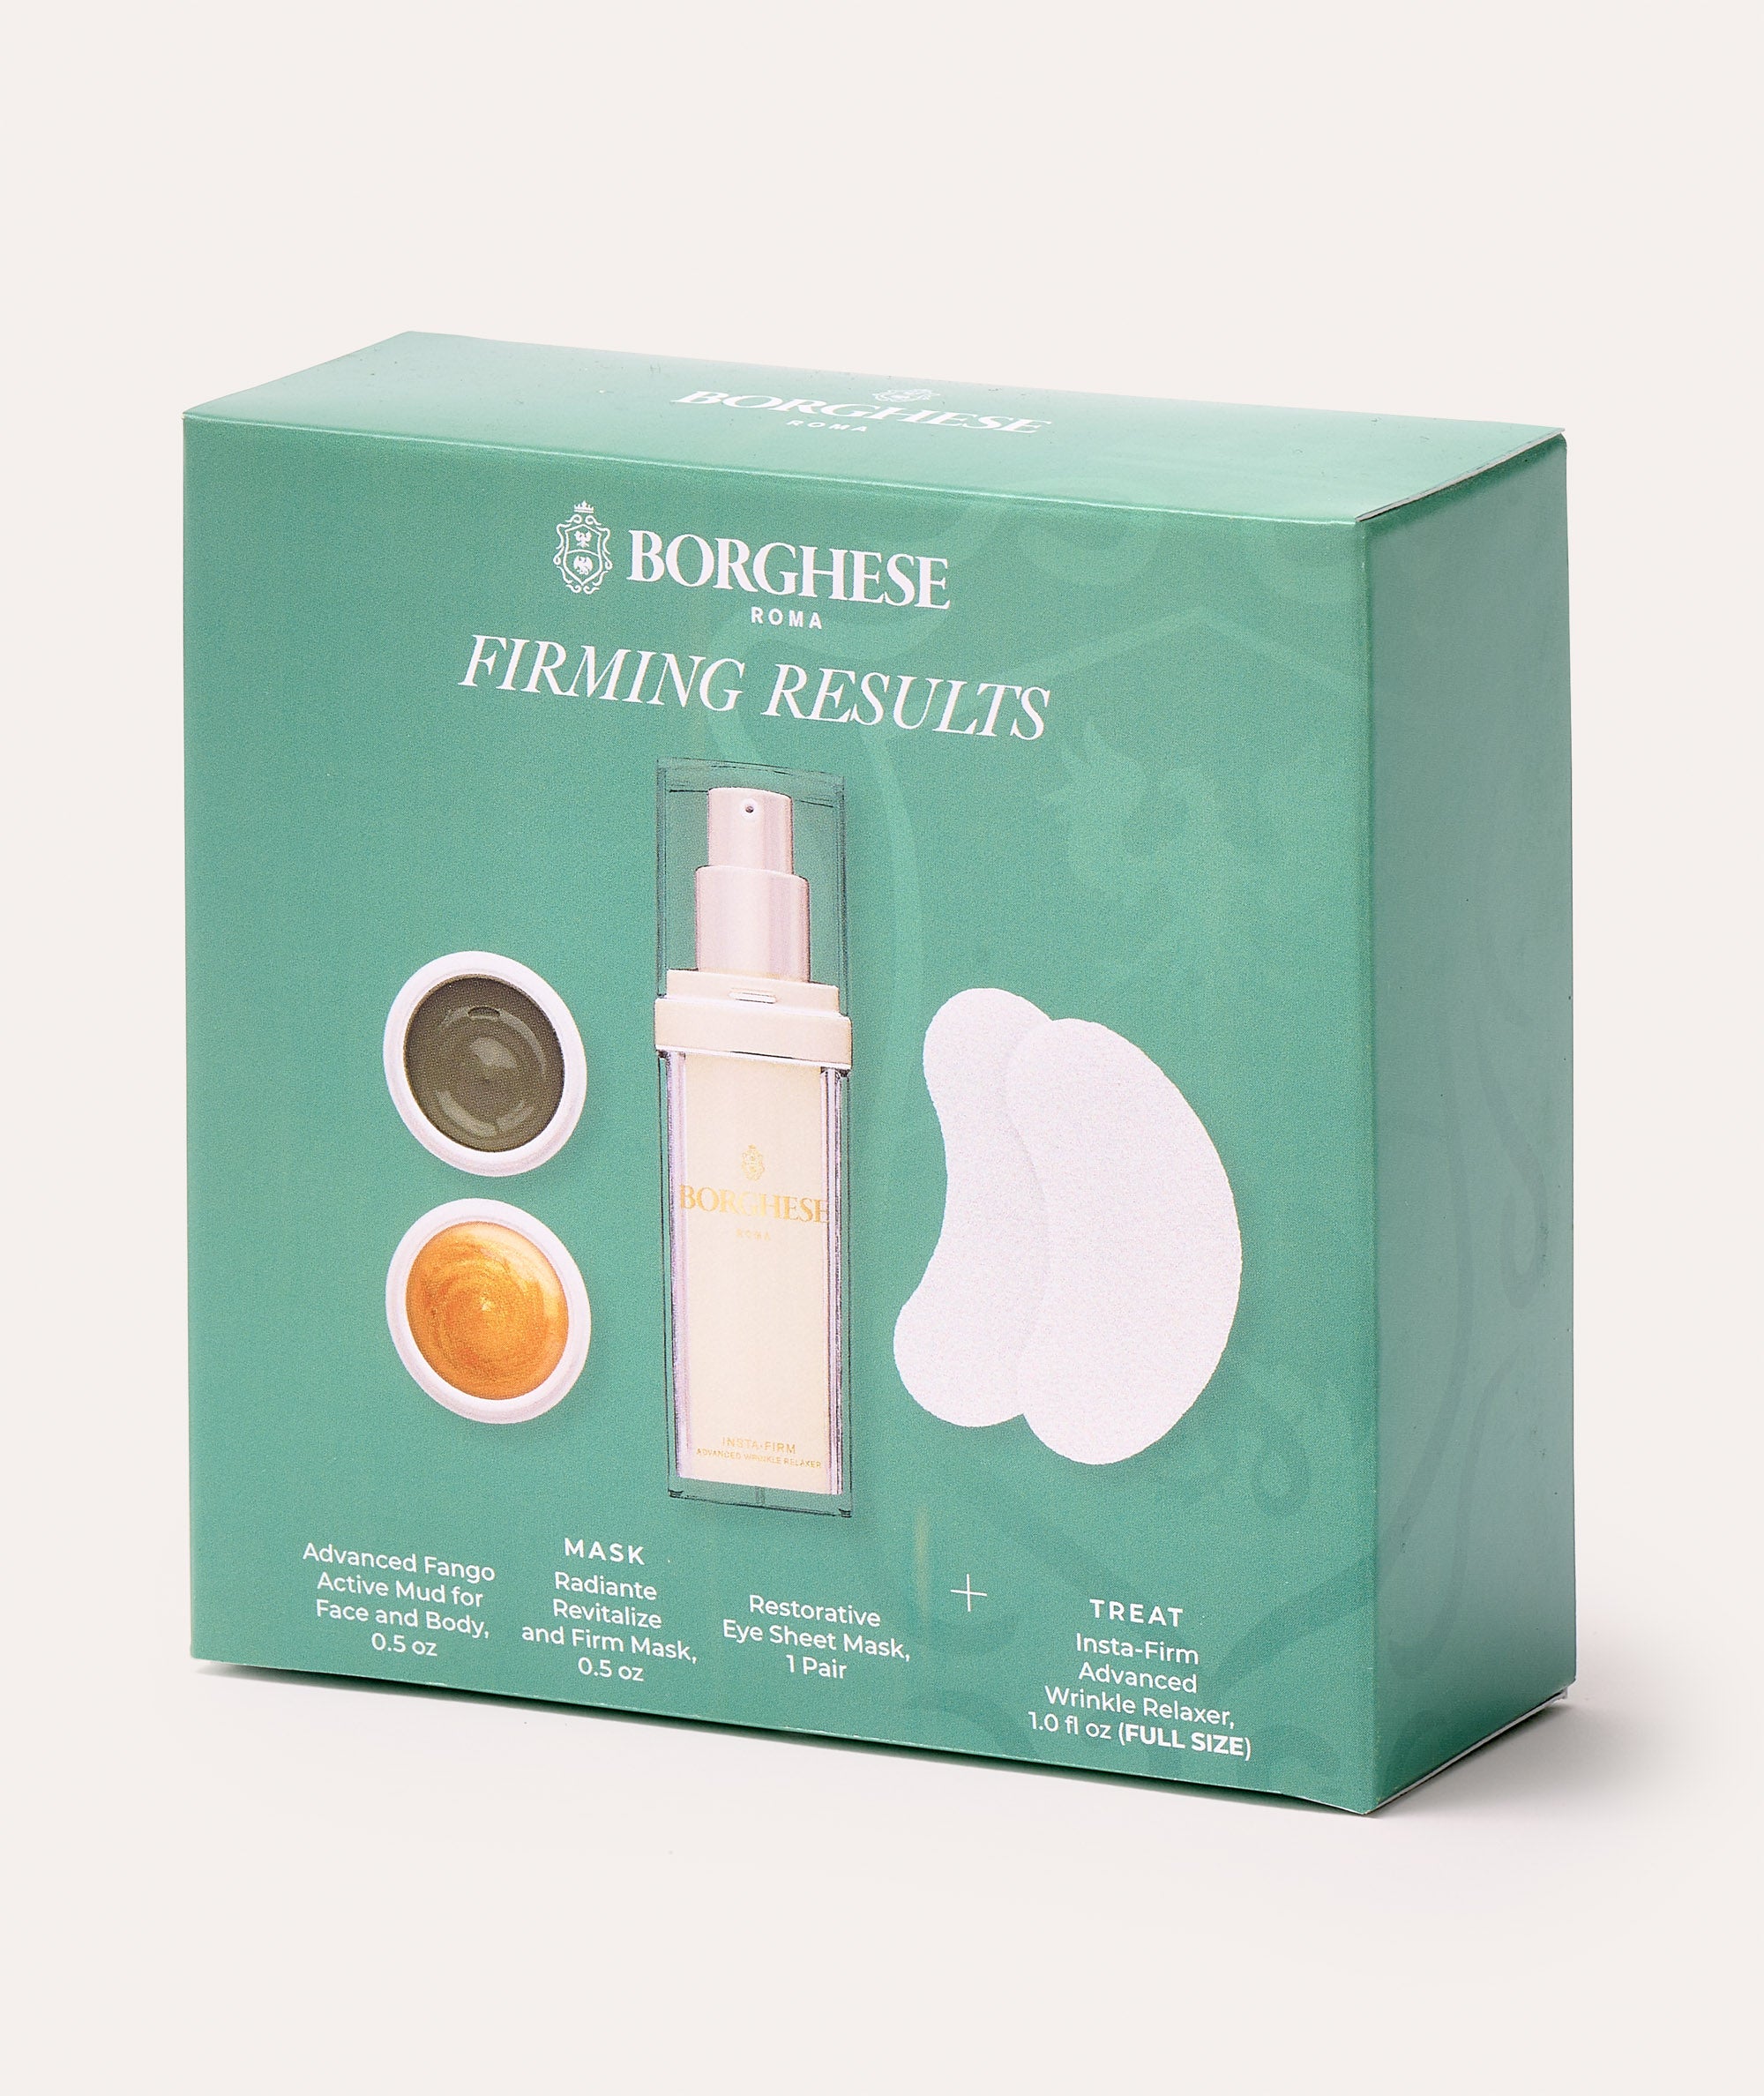 The Borghese 4-Piece Firming Results Gift Set green gift box